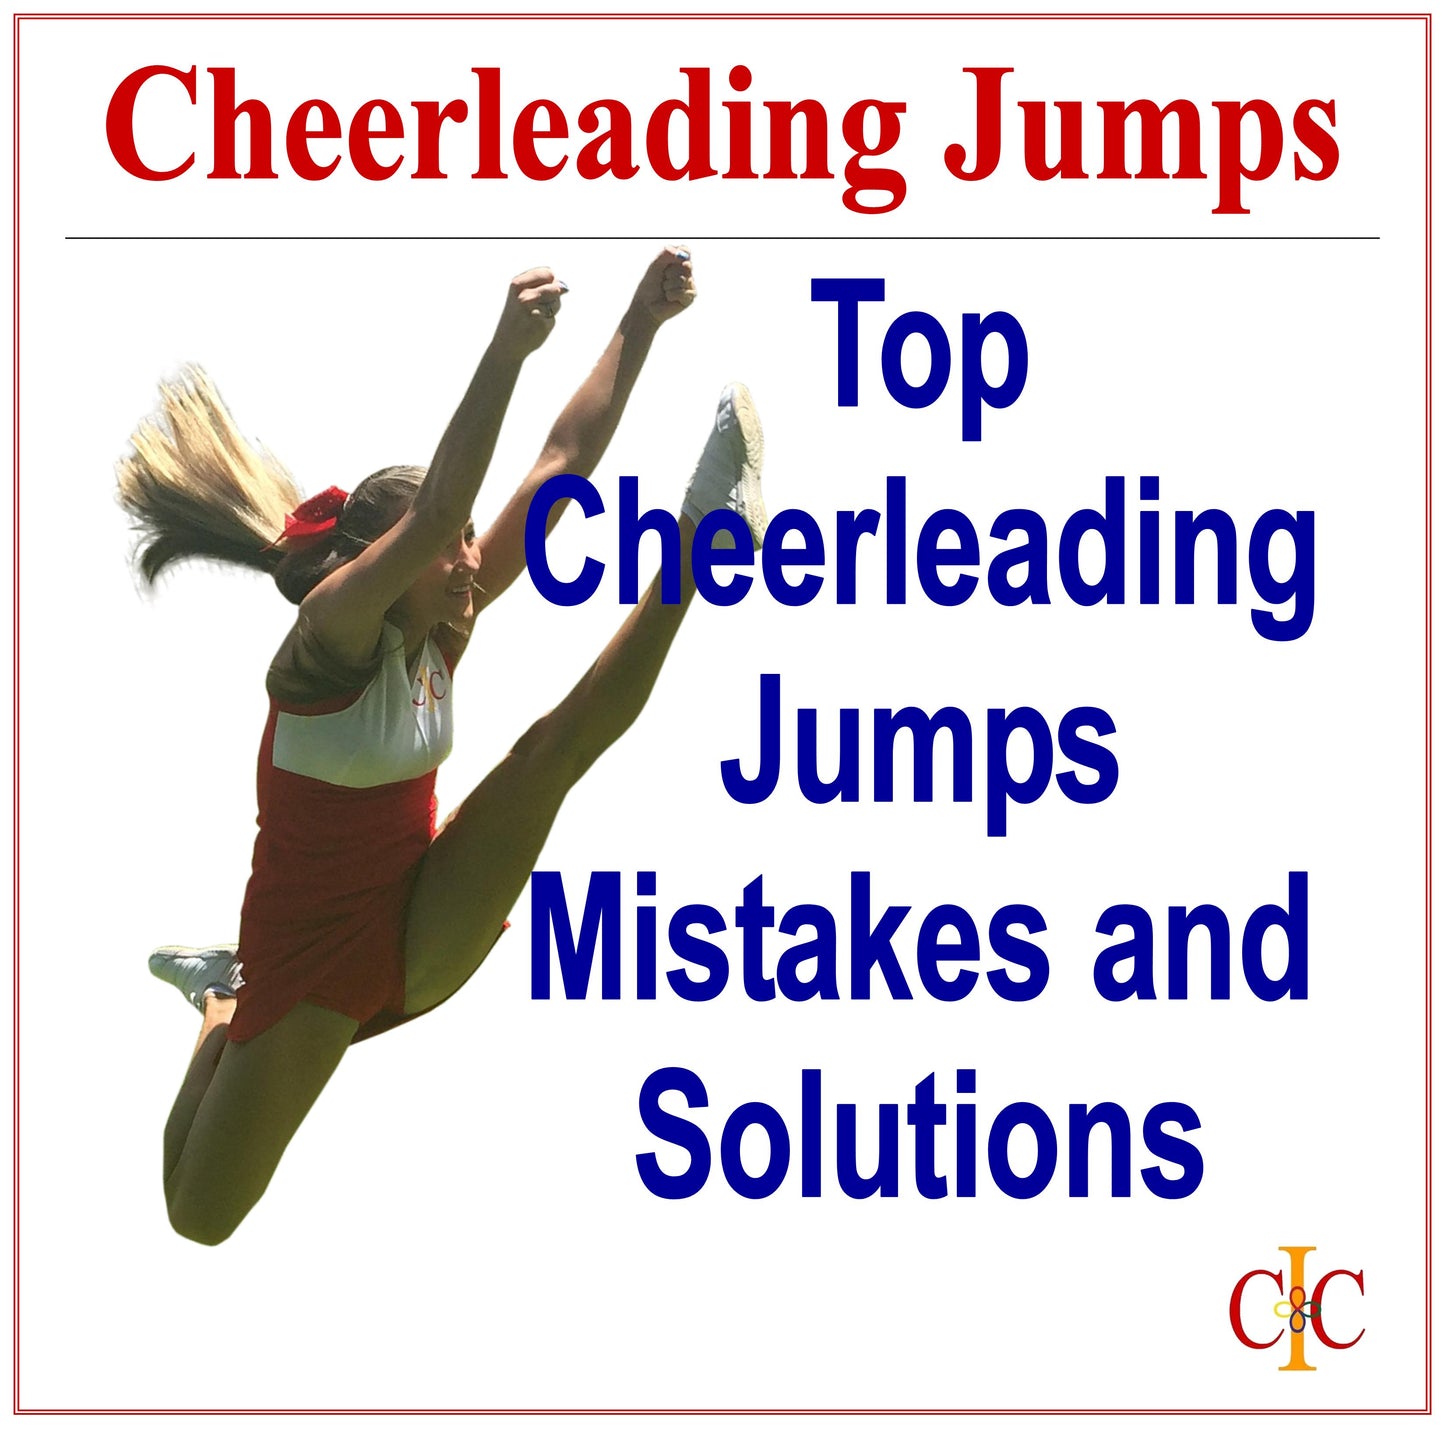 How to Improve Your Jumps